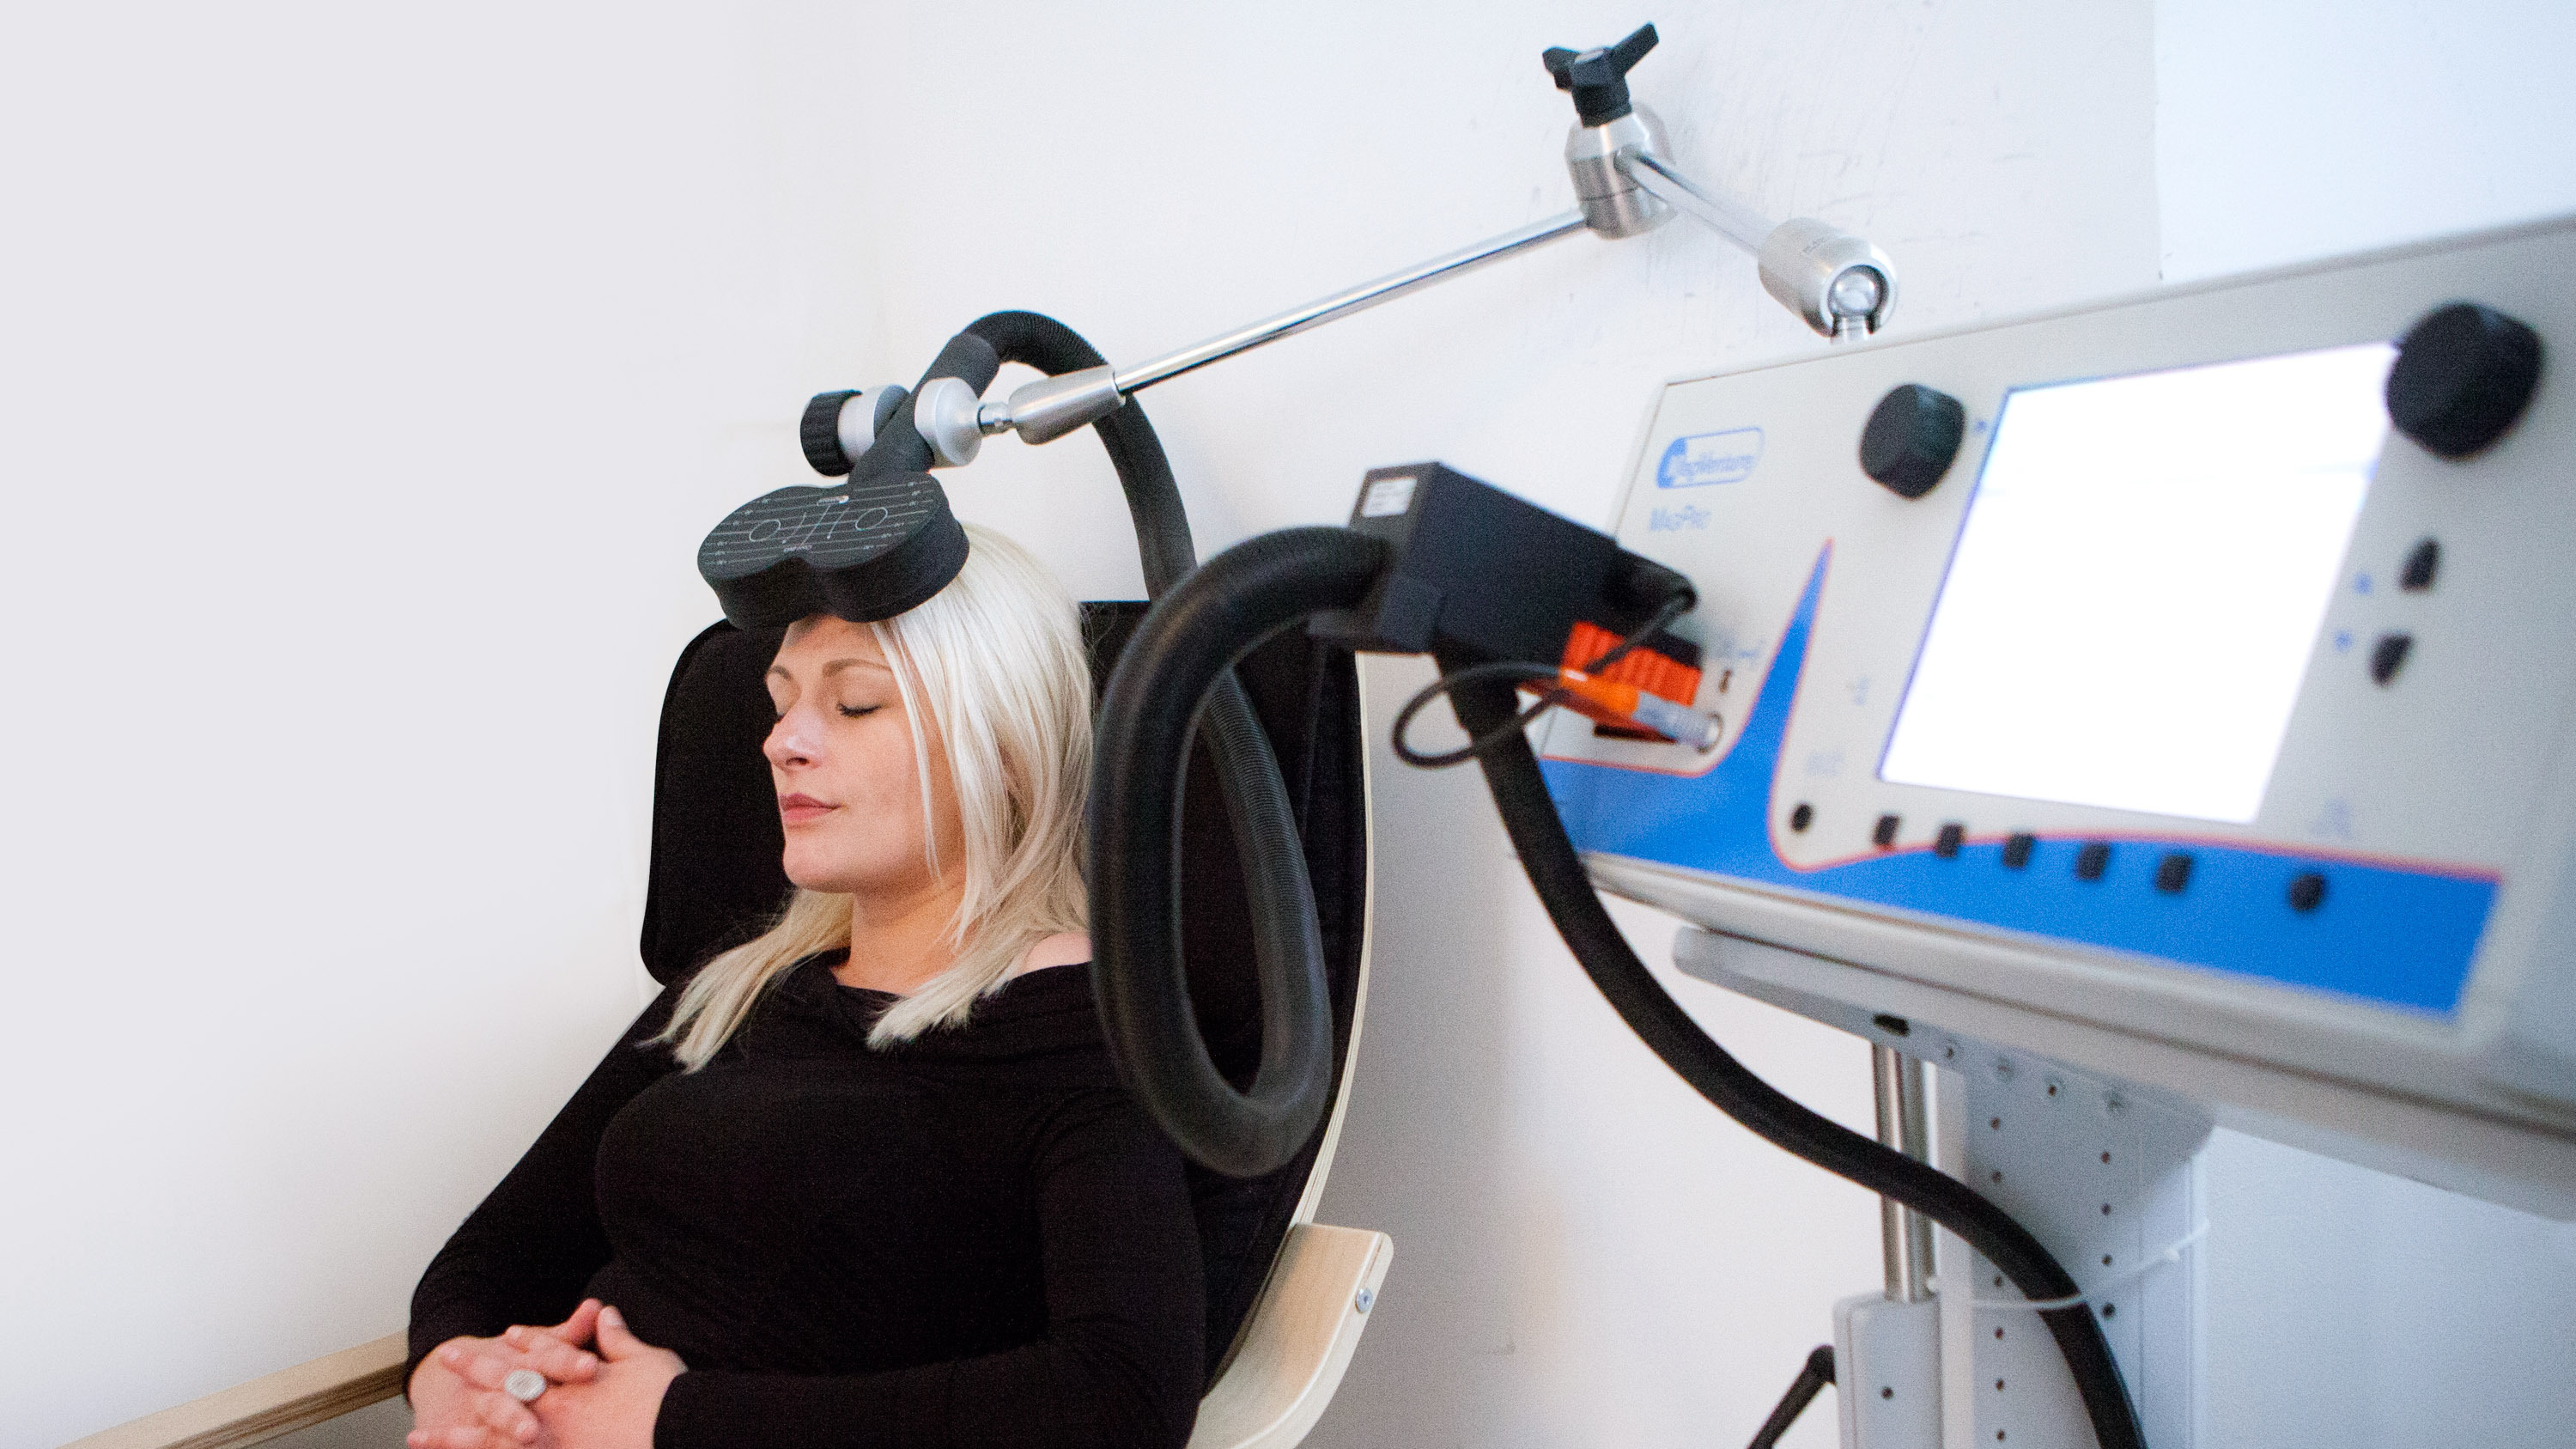 An rTMS session (repetitive Transcranial magnetic stimulation) in the Depression Centre, Paris, France. A depressed patient receives a daily session for a 10-day period. TMS delivers magnetic impulses to the left prefrontal cortex, the area of the brain linked to depression, in order to stimulate the nerve cells.